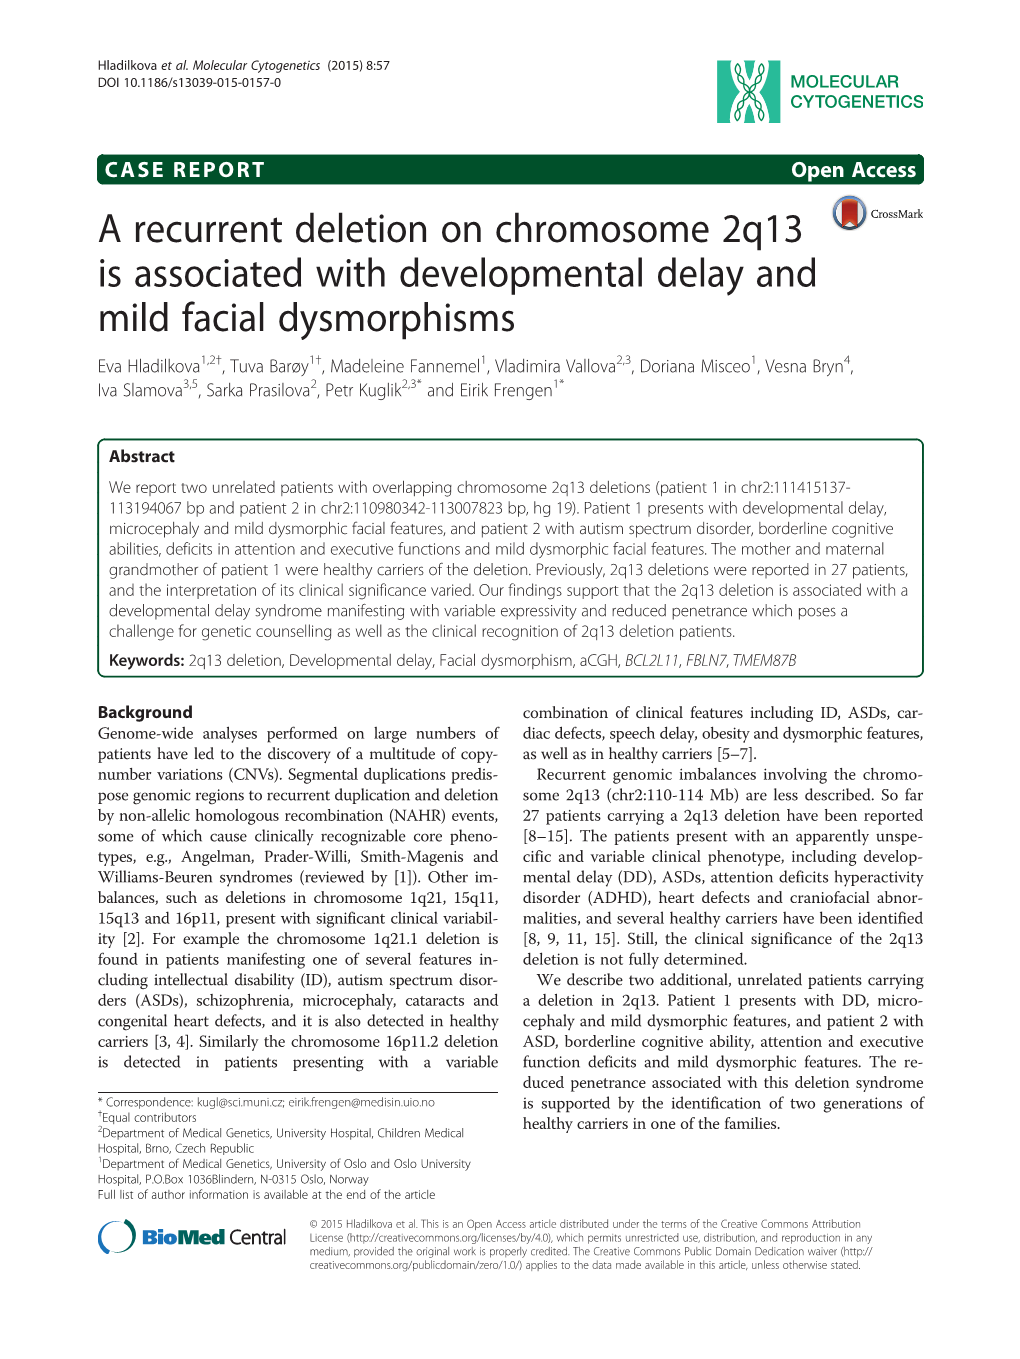 A Recurrent Deletion on Chromosome 2Q13 Is Associated With